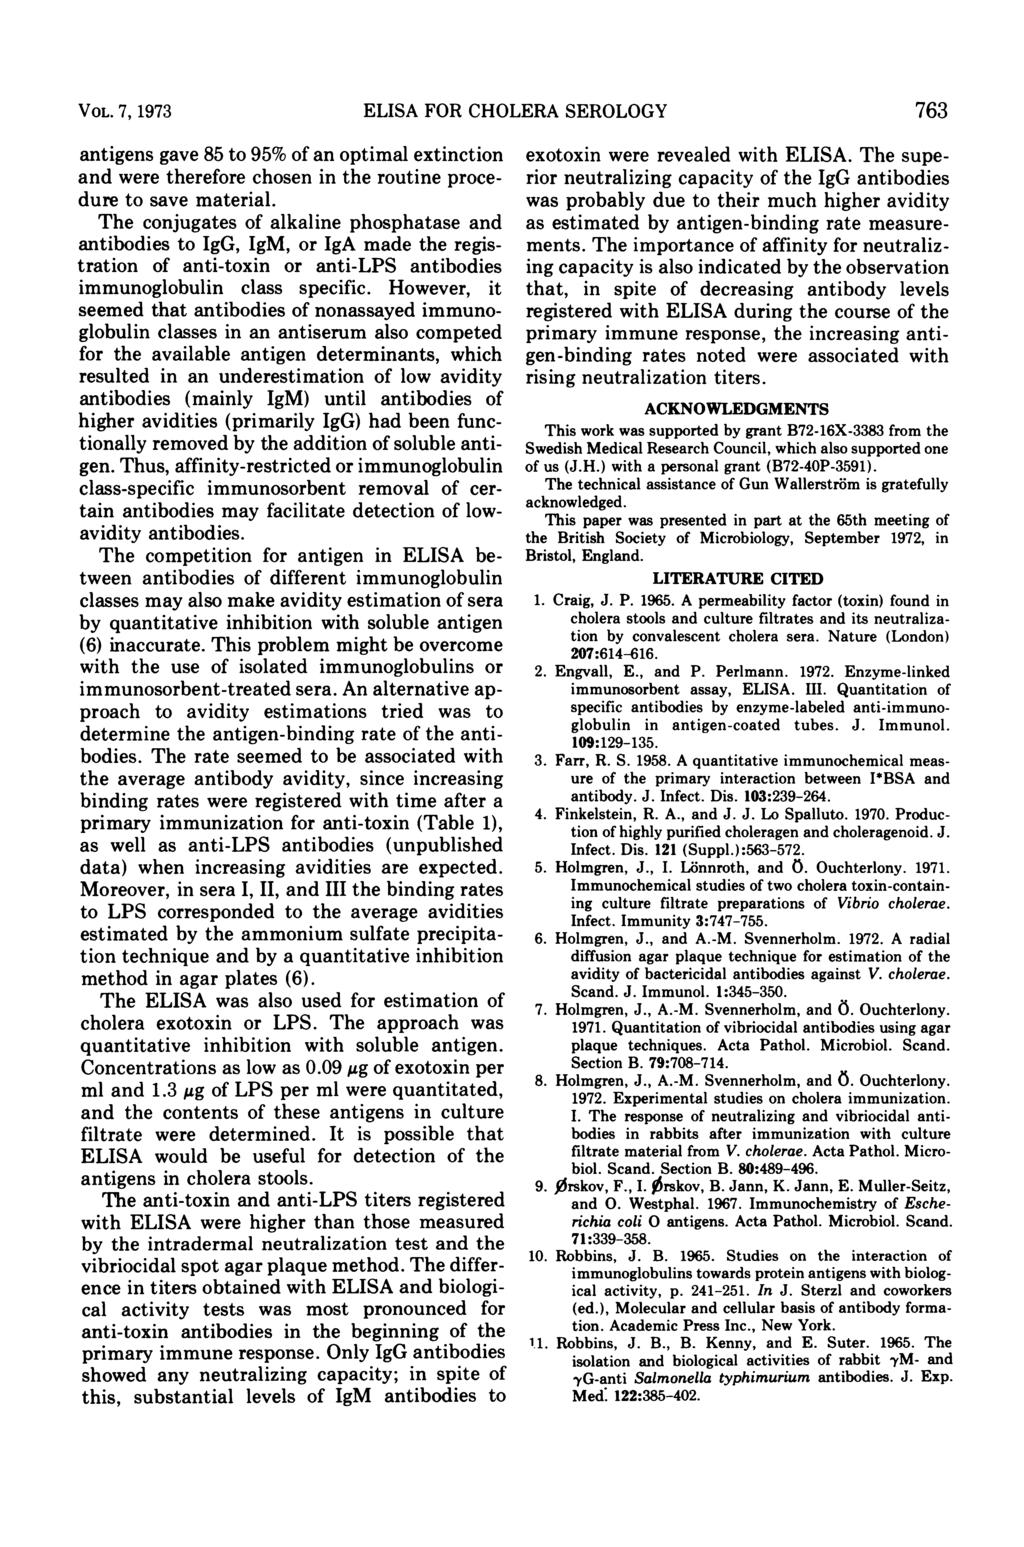 VOL. 7, 1973 ELISA FOR CHOLERA SEROLOGY 763 antigens gave 85 to 95% of an optimal extinction and were therefore chosen in the routine procedure to save material.